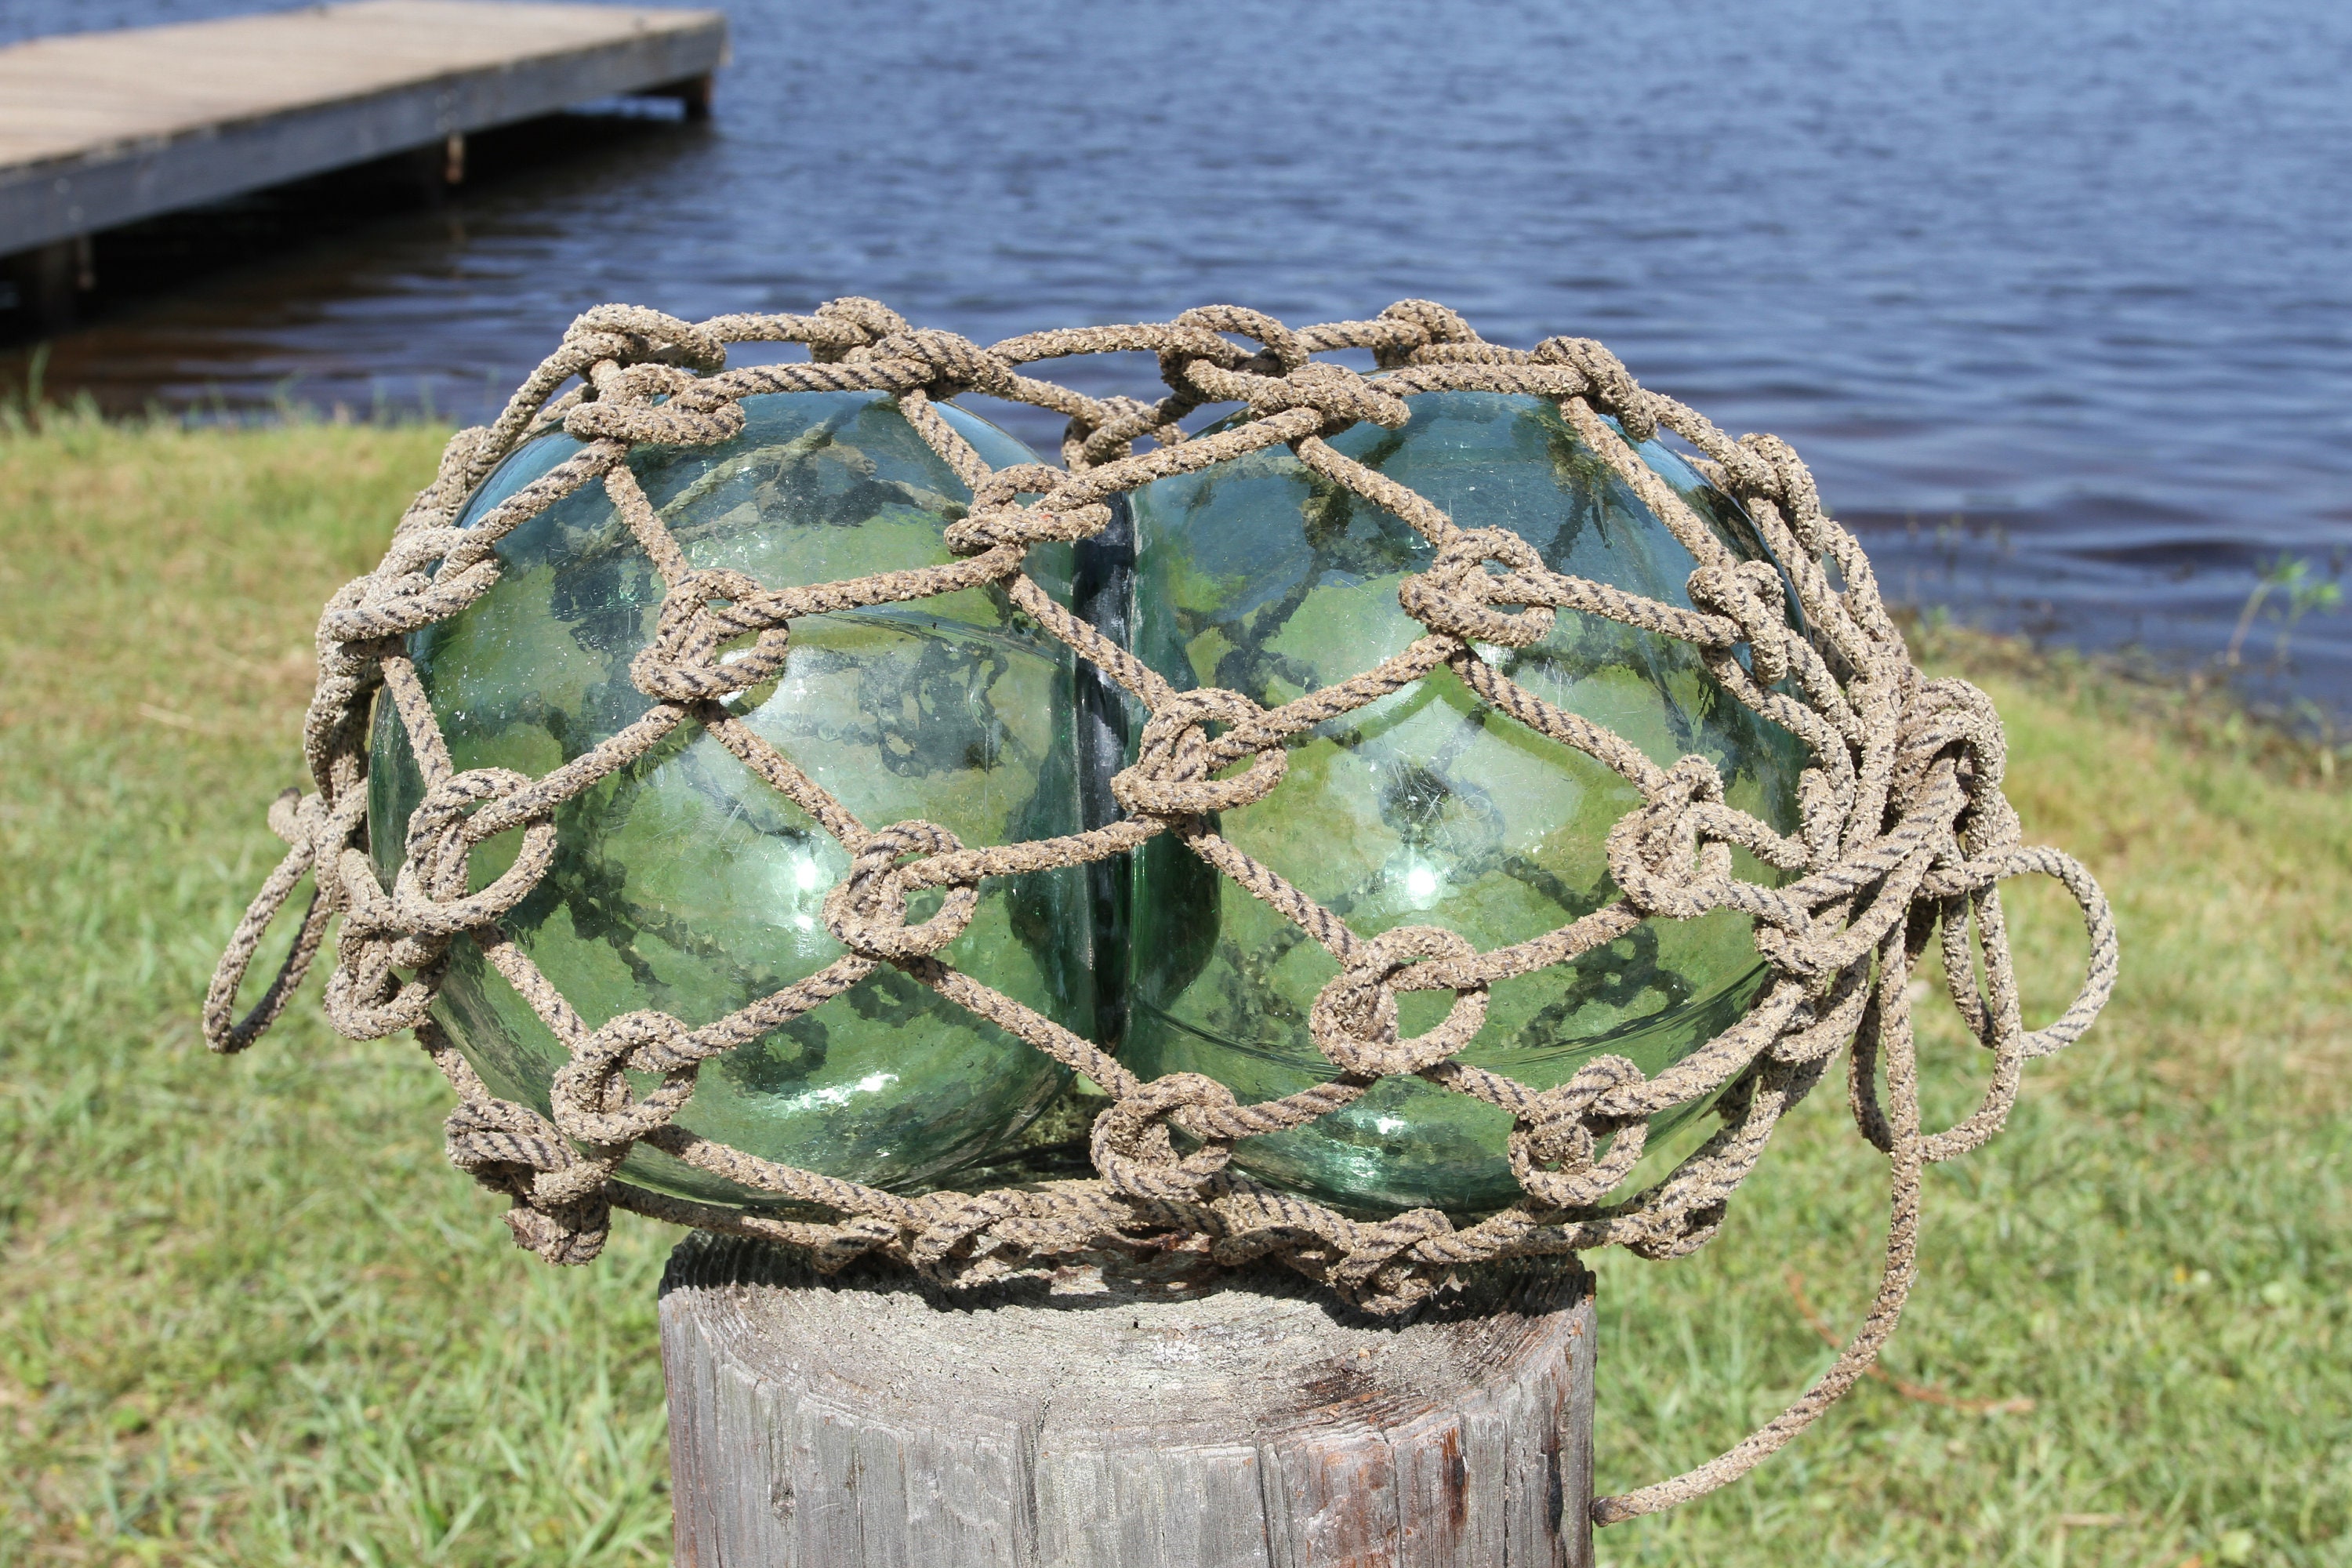 Authentic Glass Fishing Floats With Nets From the Pre-70's Era